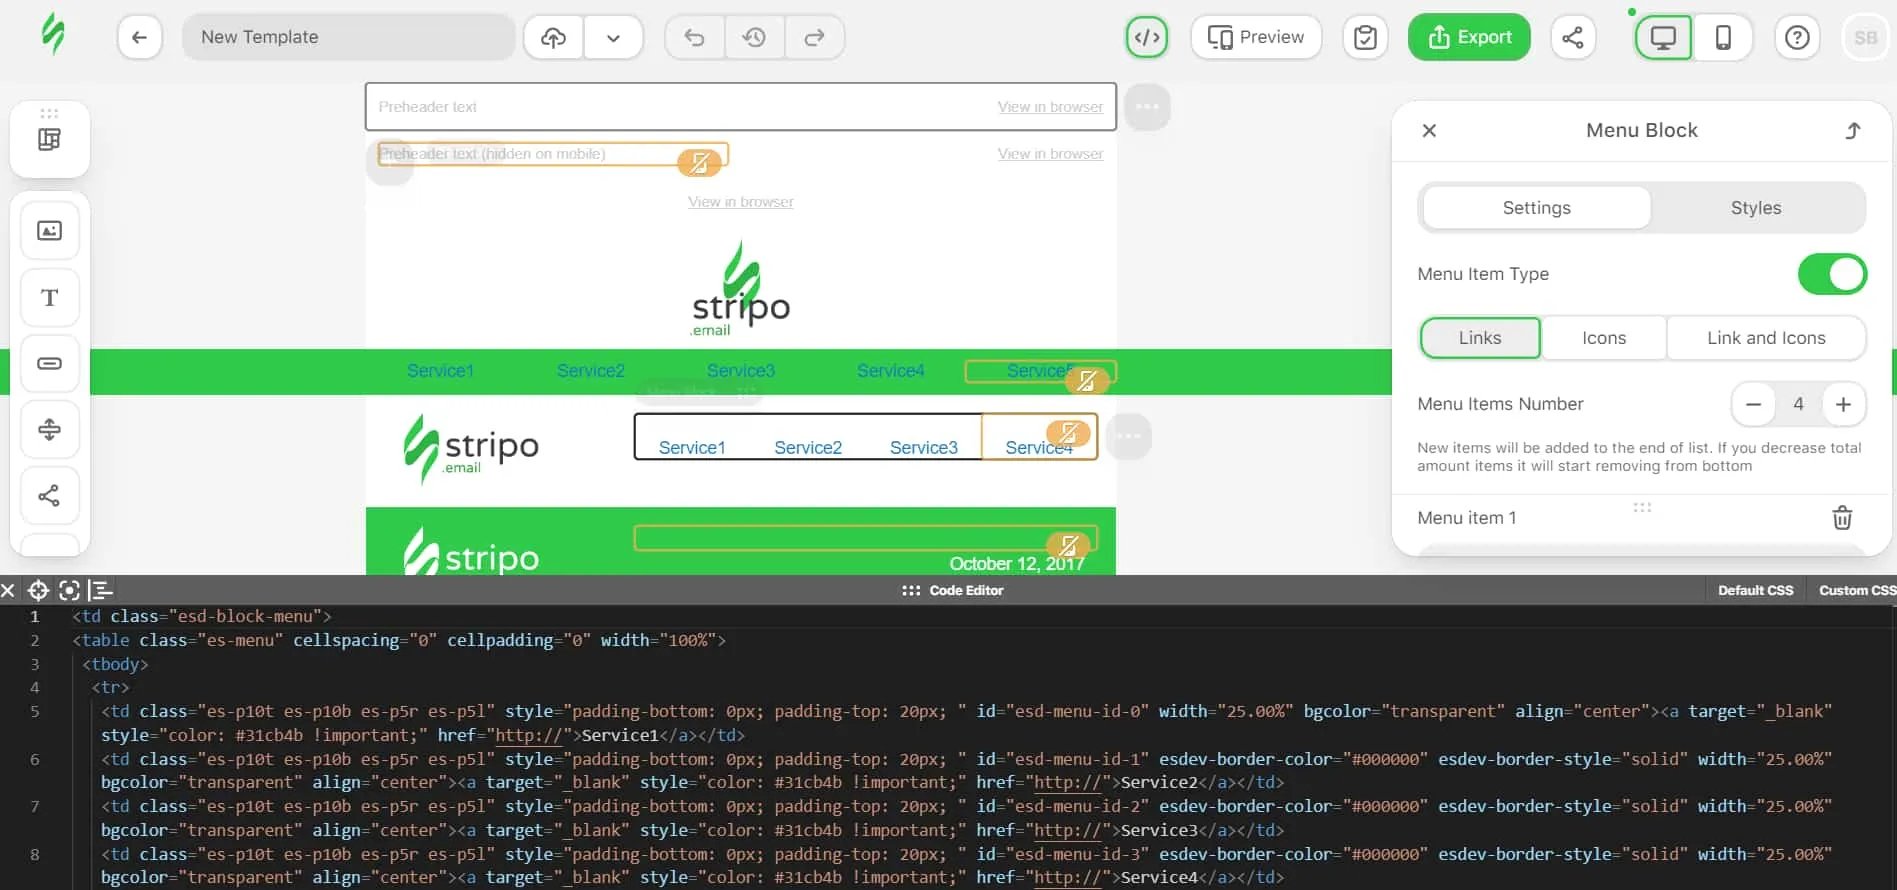 bulk emailing software, Stripo's drag-and-drop email builder and HTML code editor